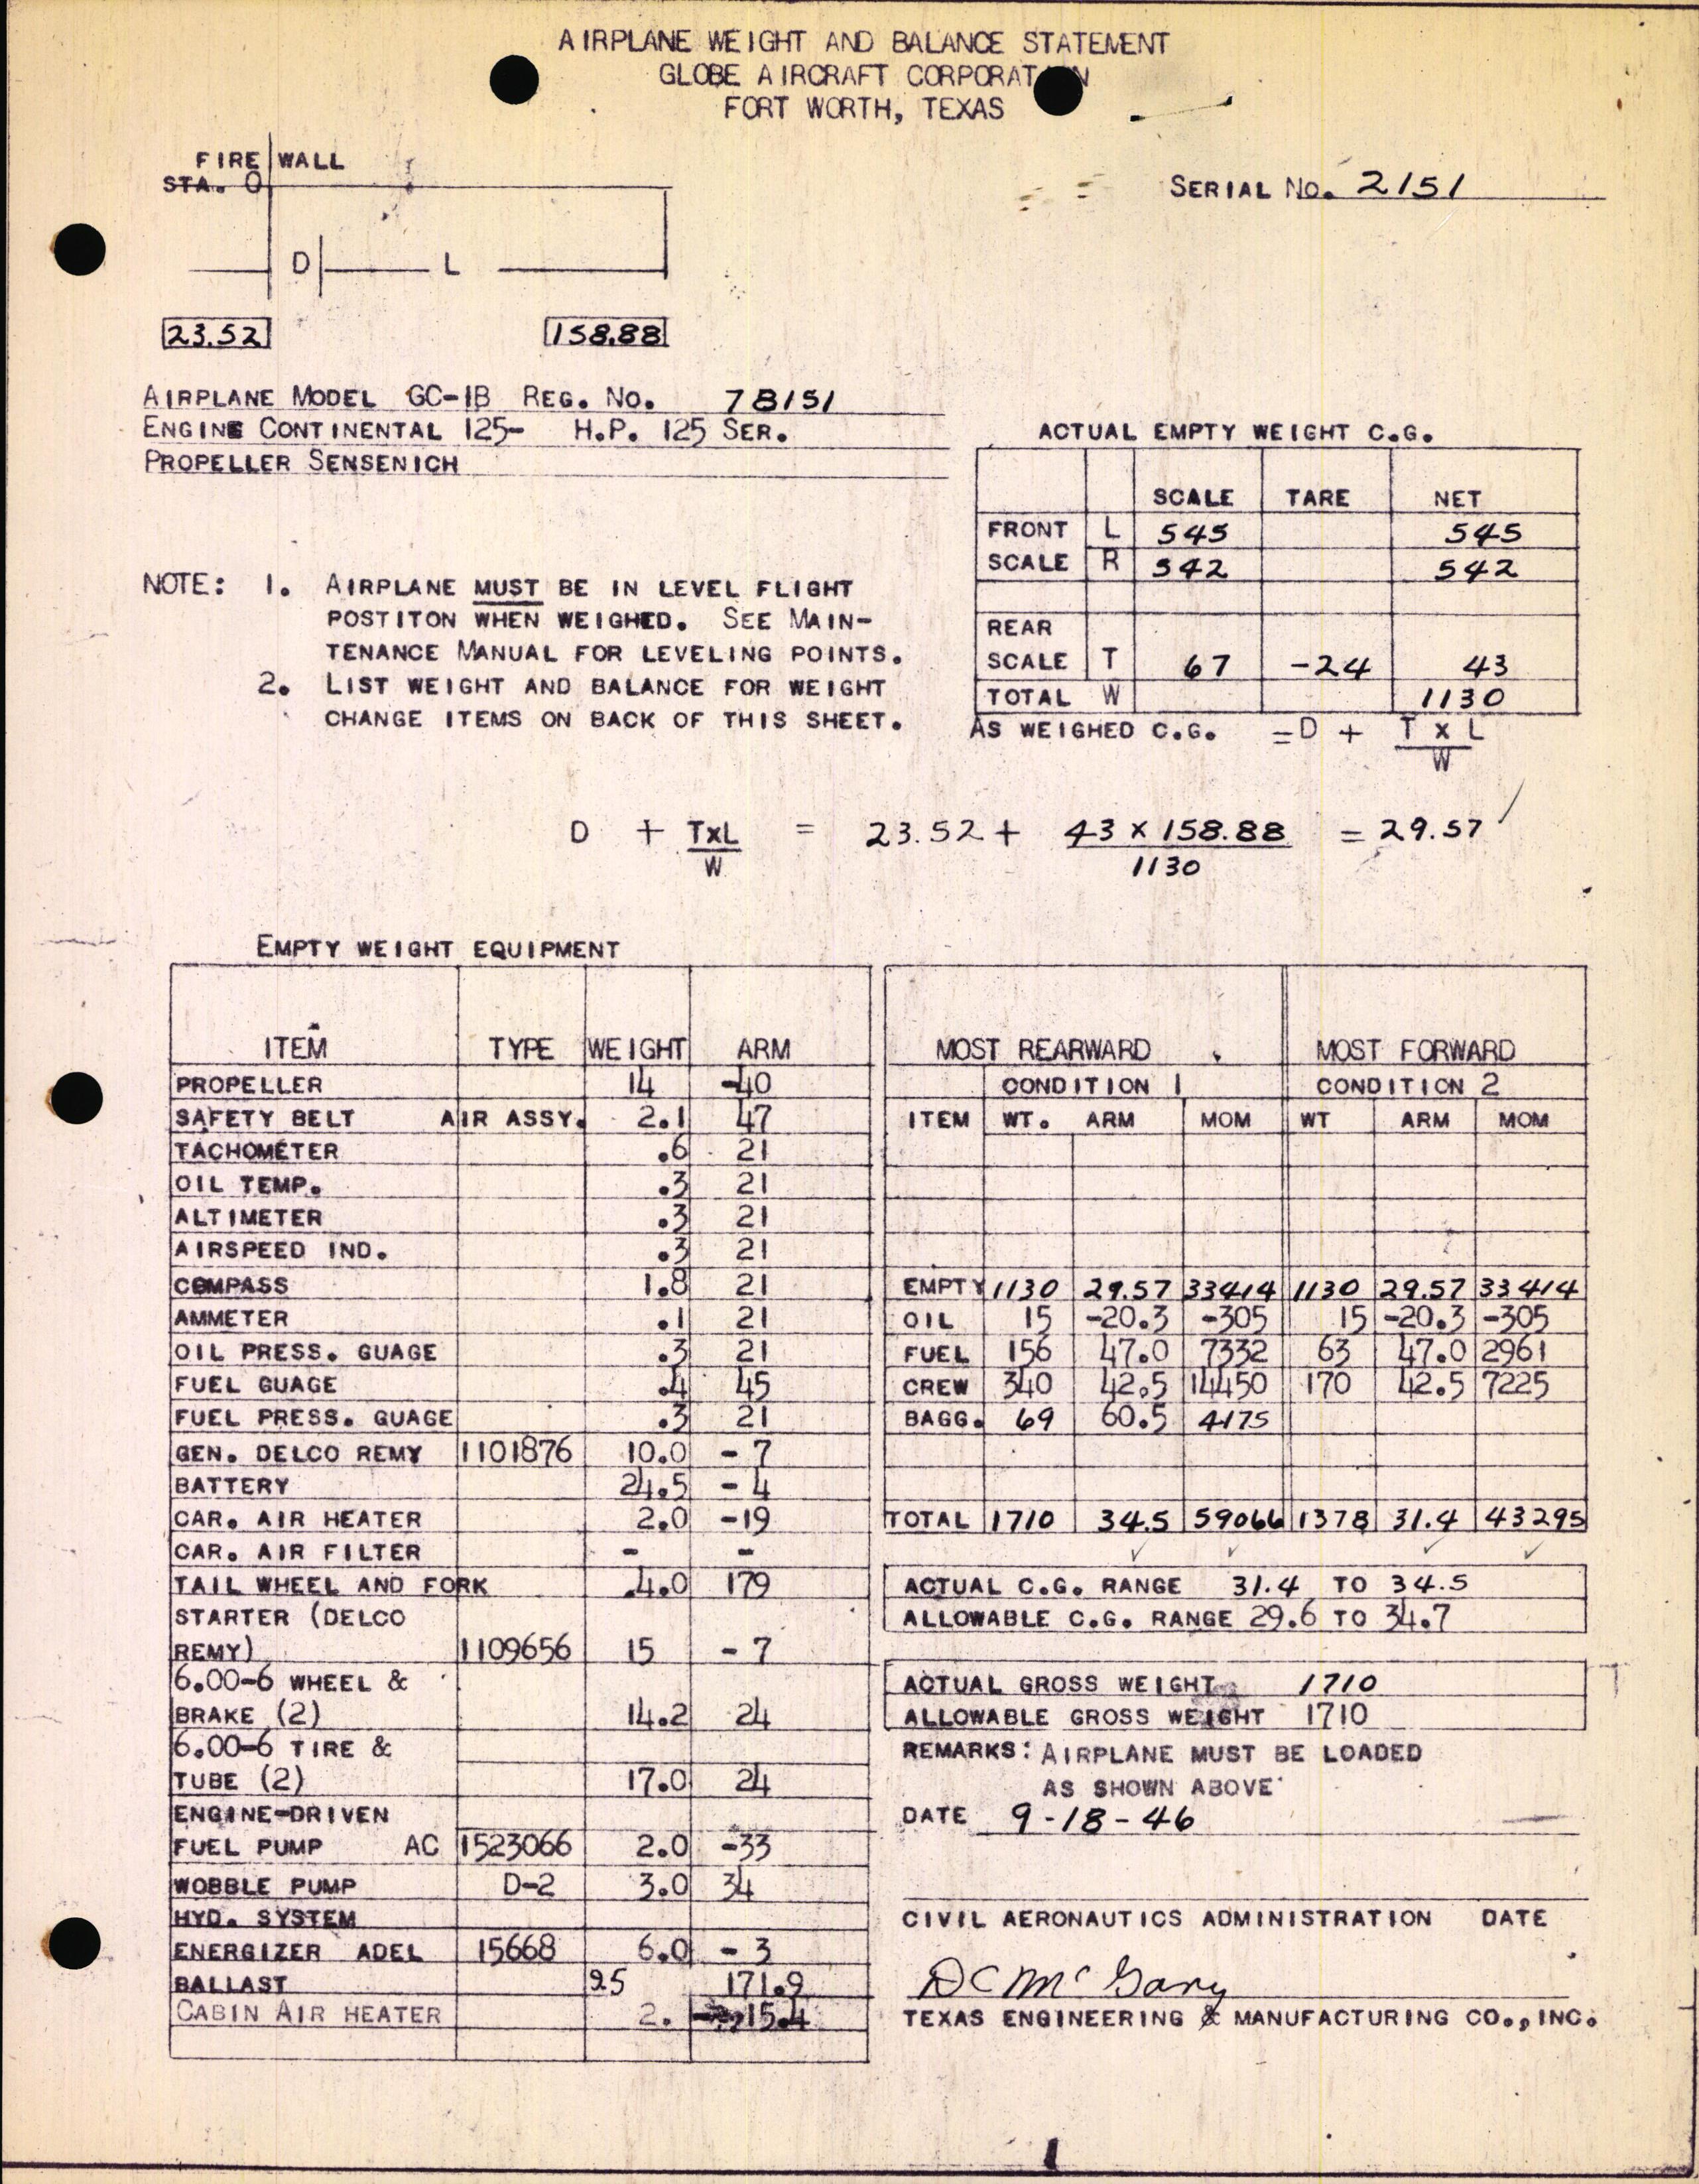 Sample page 1 from AirCorps Library document: Technical Information for Serial Number 2151